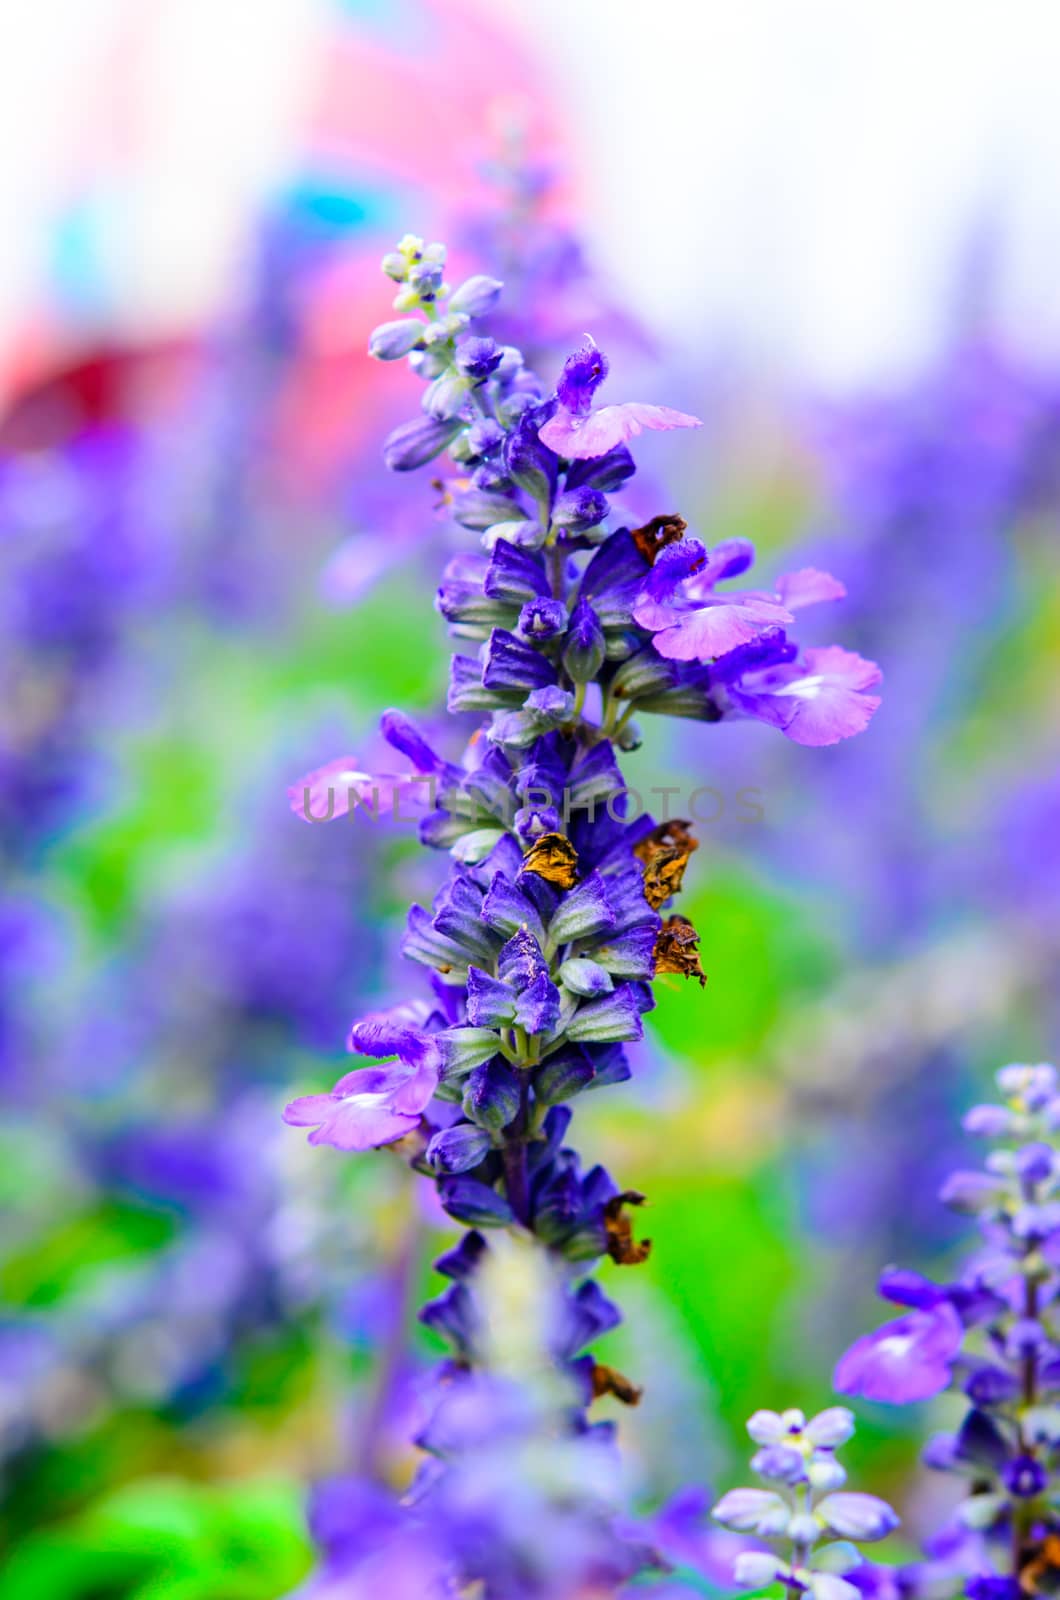 Blooming Salvia flowers by aoo3771